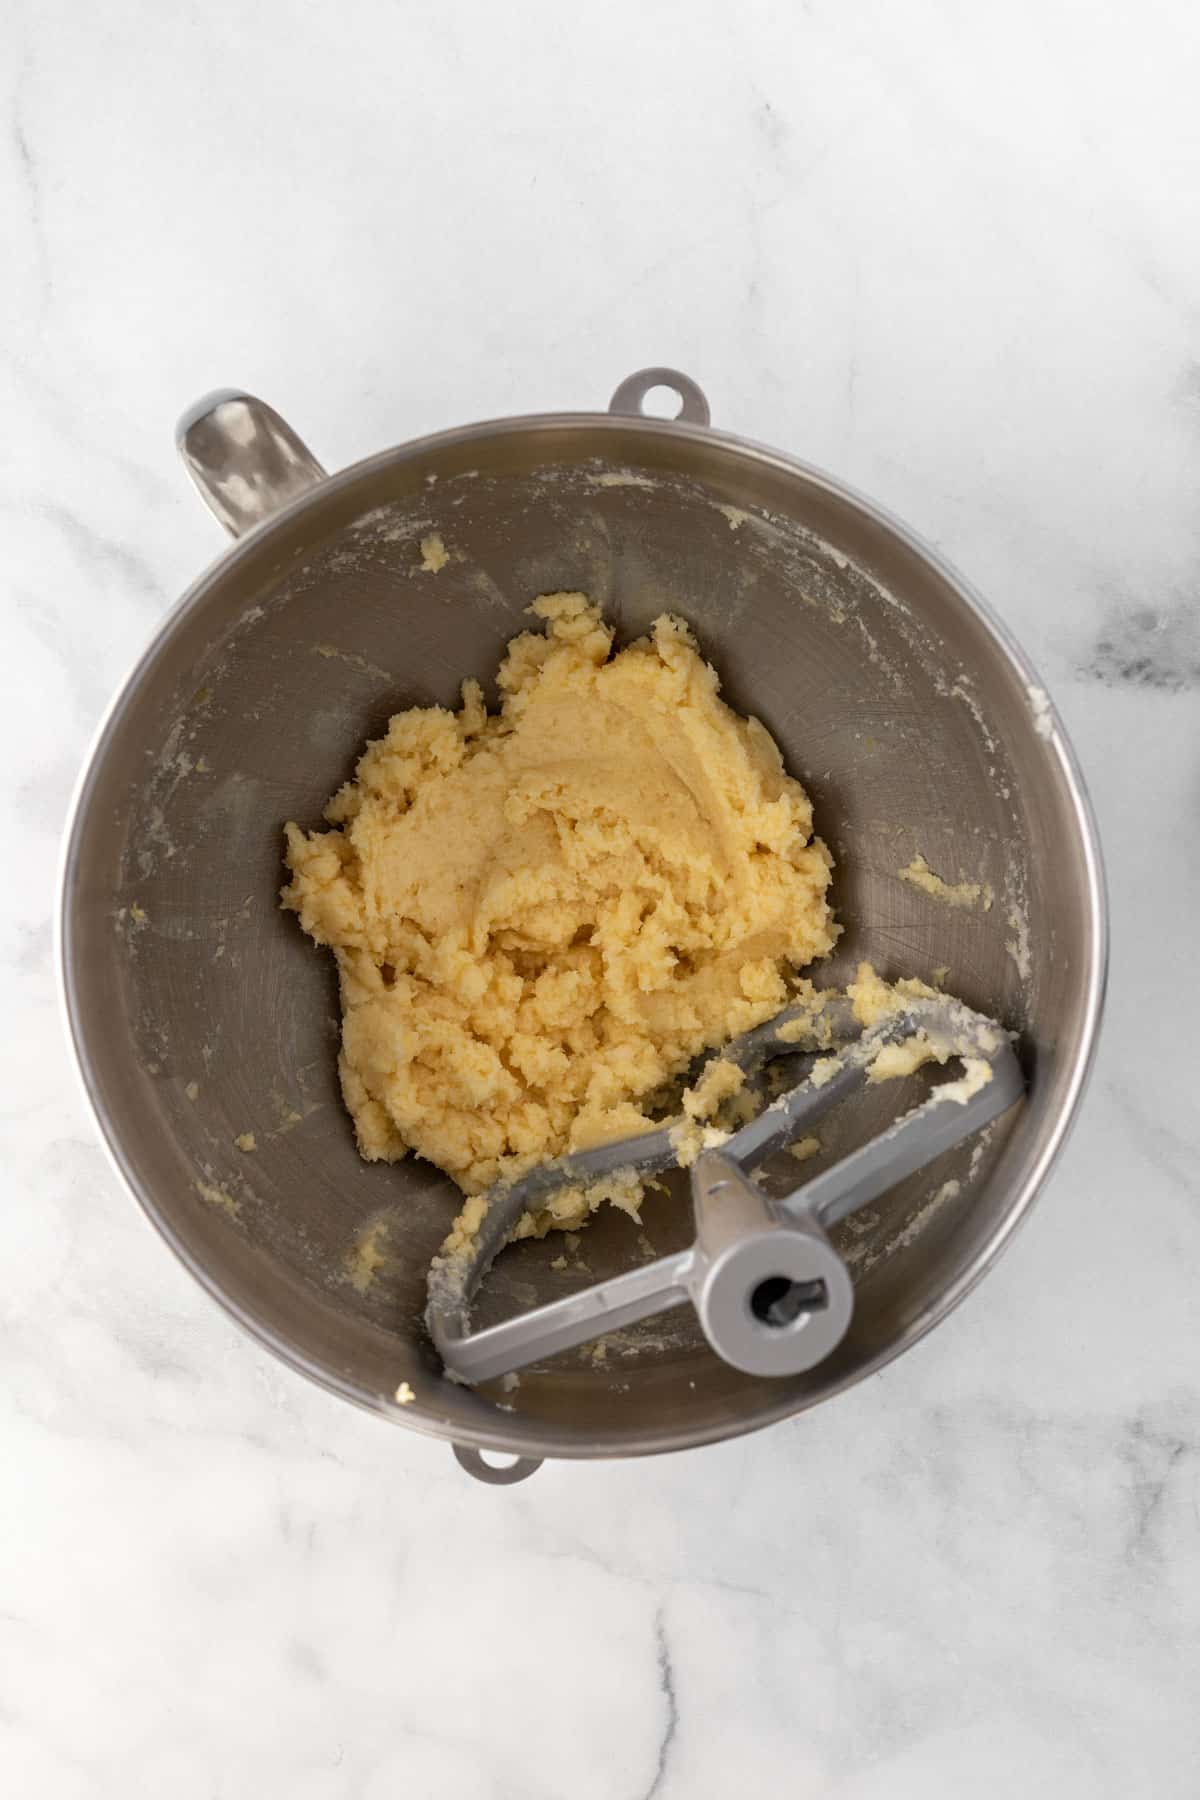 Mixture of butter, sugar, egg, vanilla extract, and almond extract in a metal bowl.